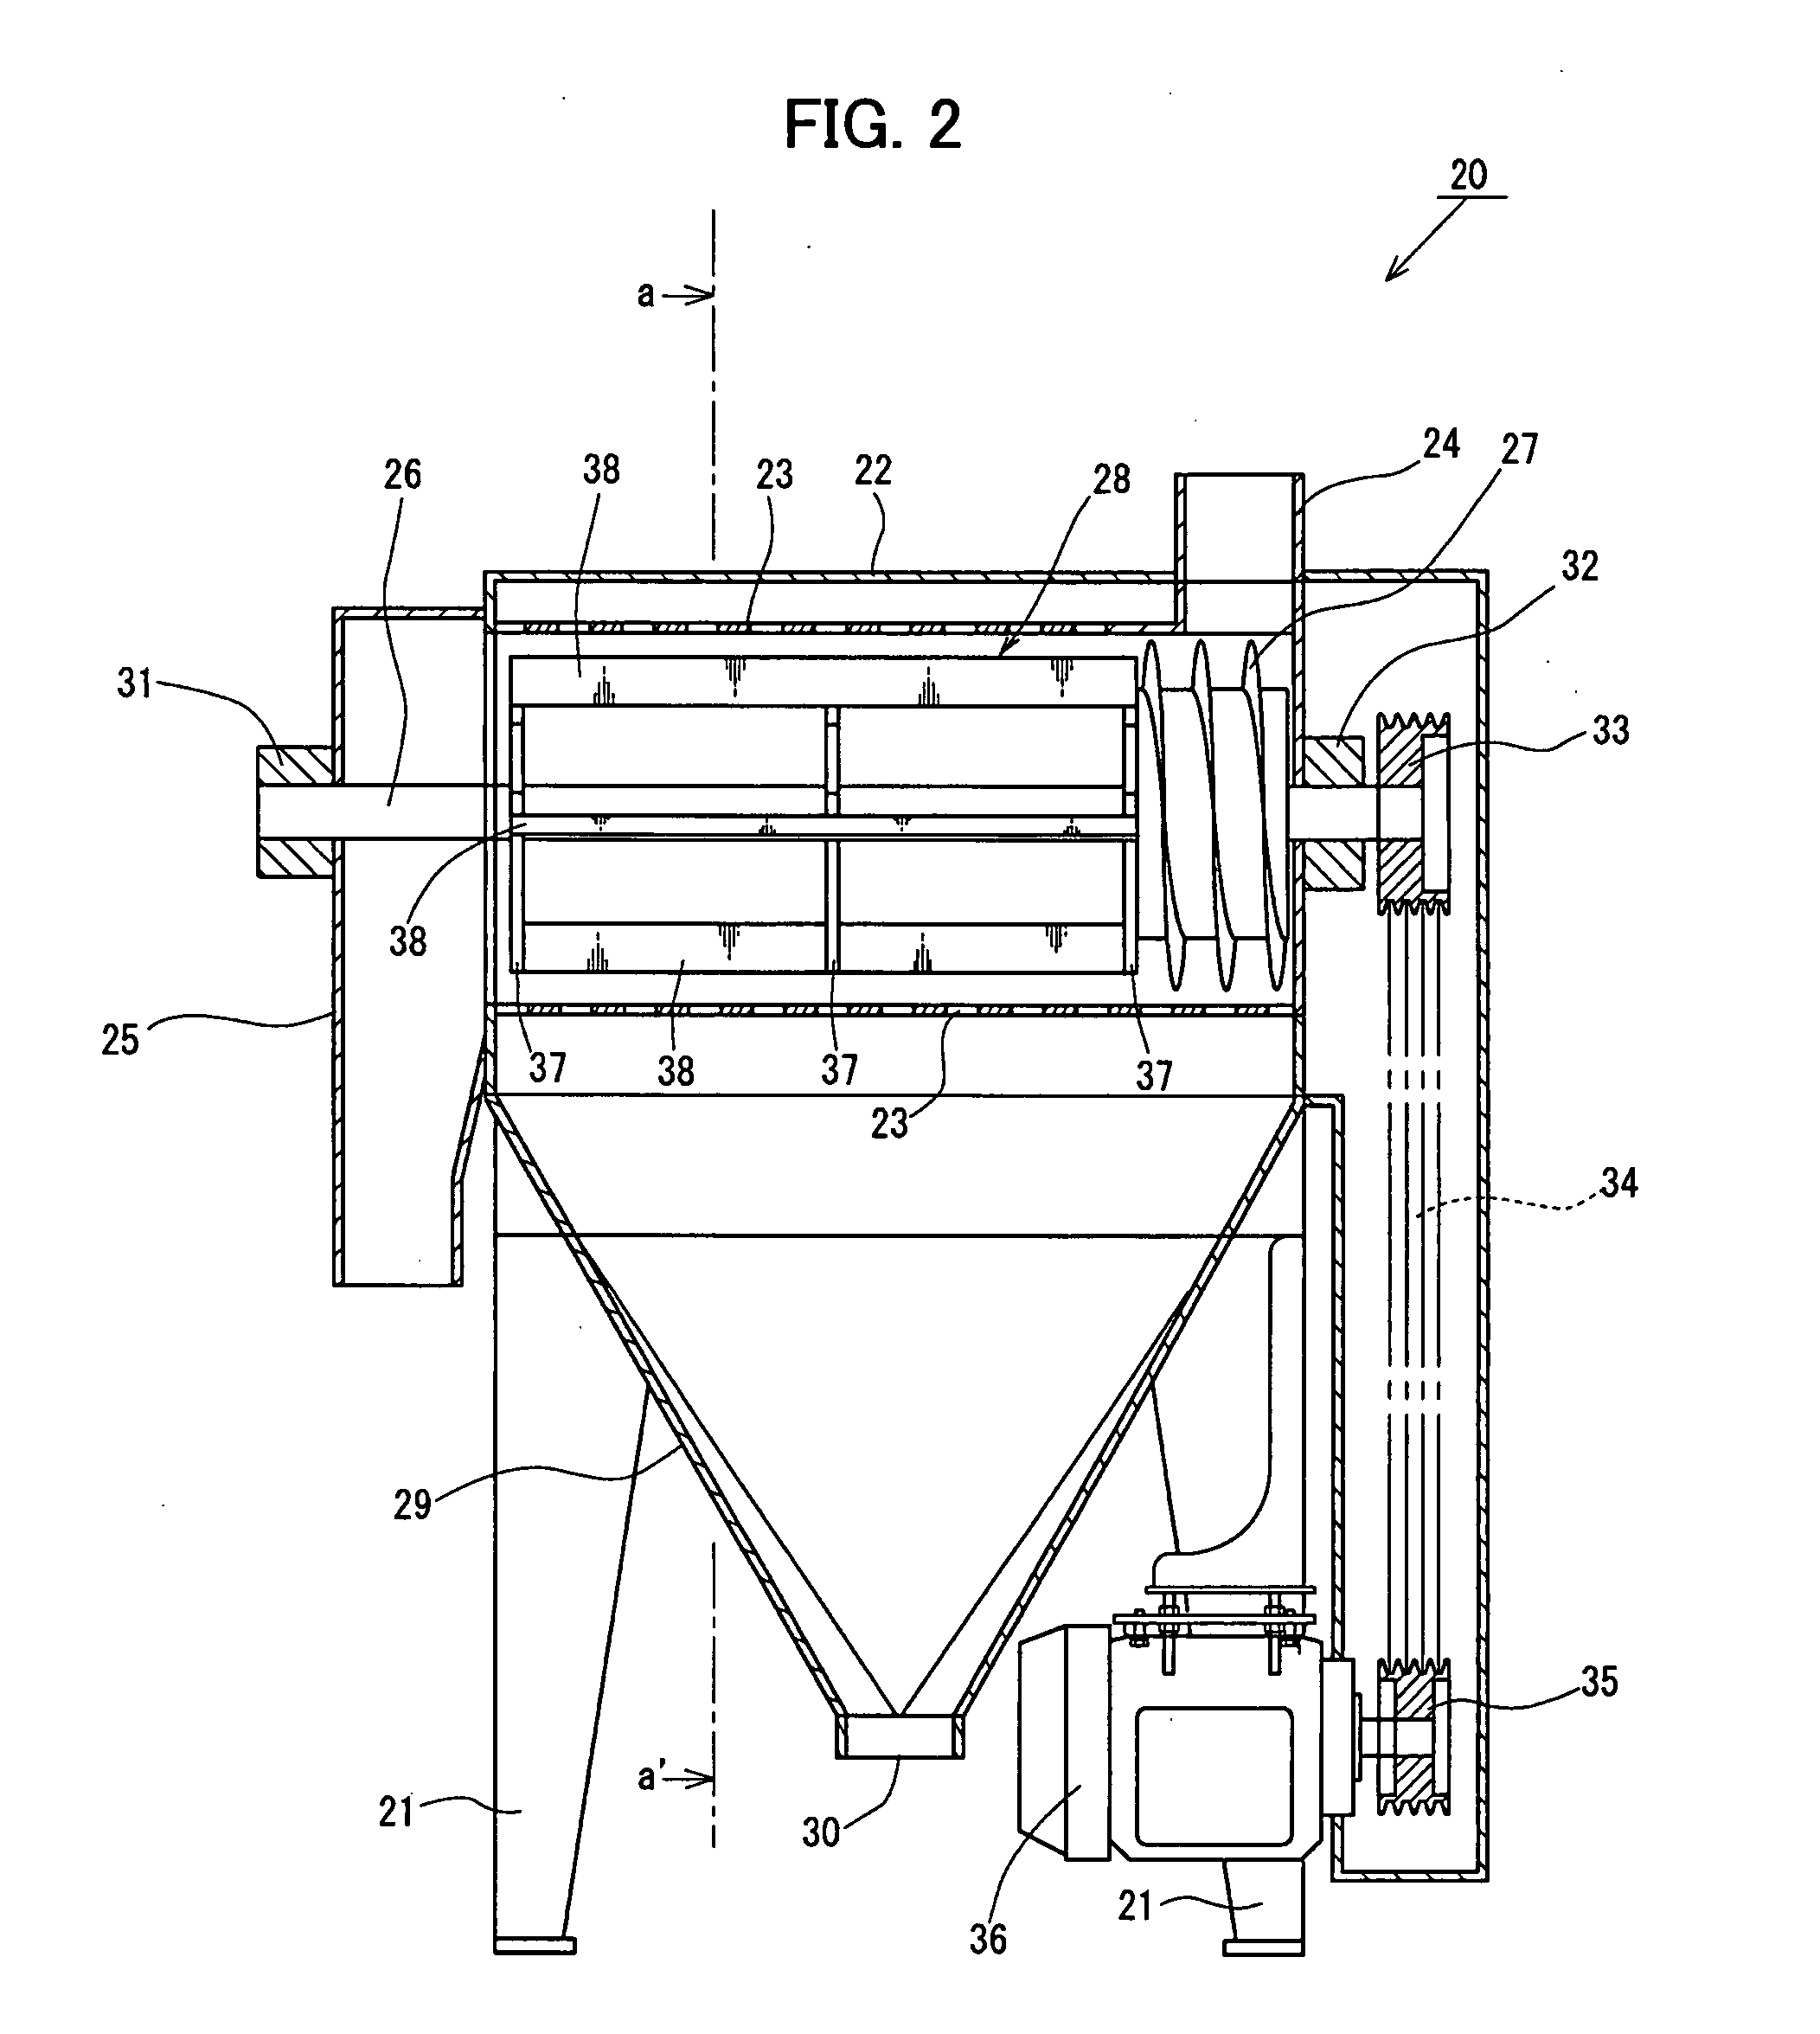 Method of and apparatus for processing corn grains for production of ethanol